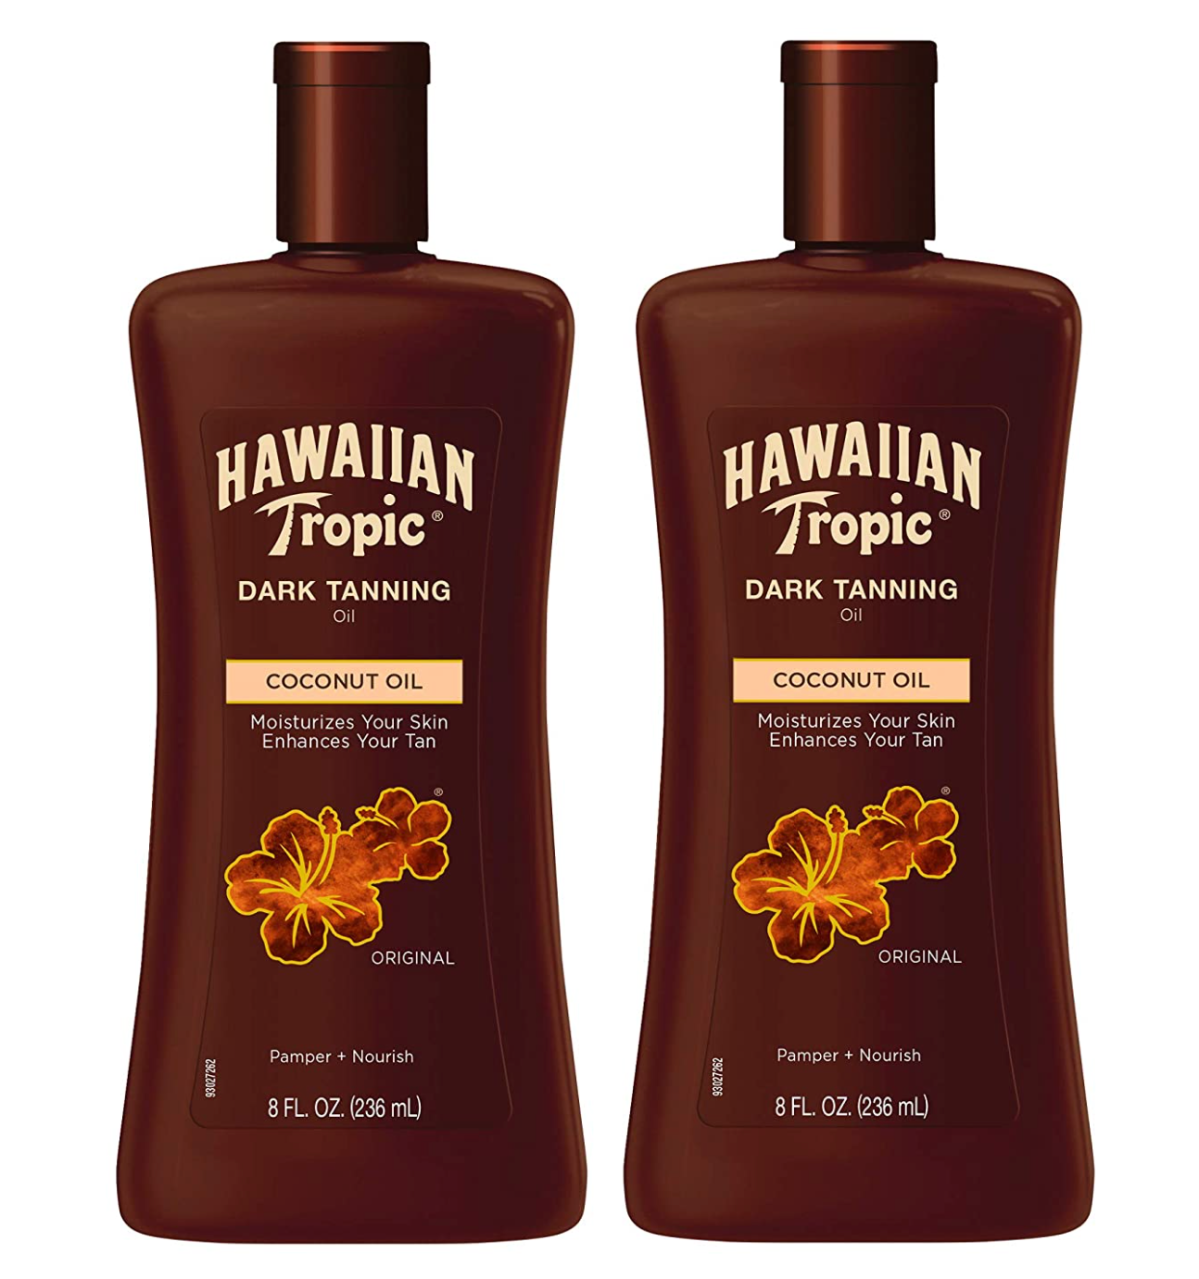 Tanning Bed & Tan Accelerator Lotions to Help You Faster